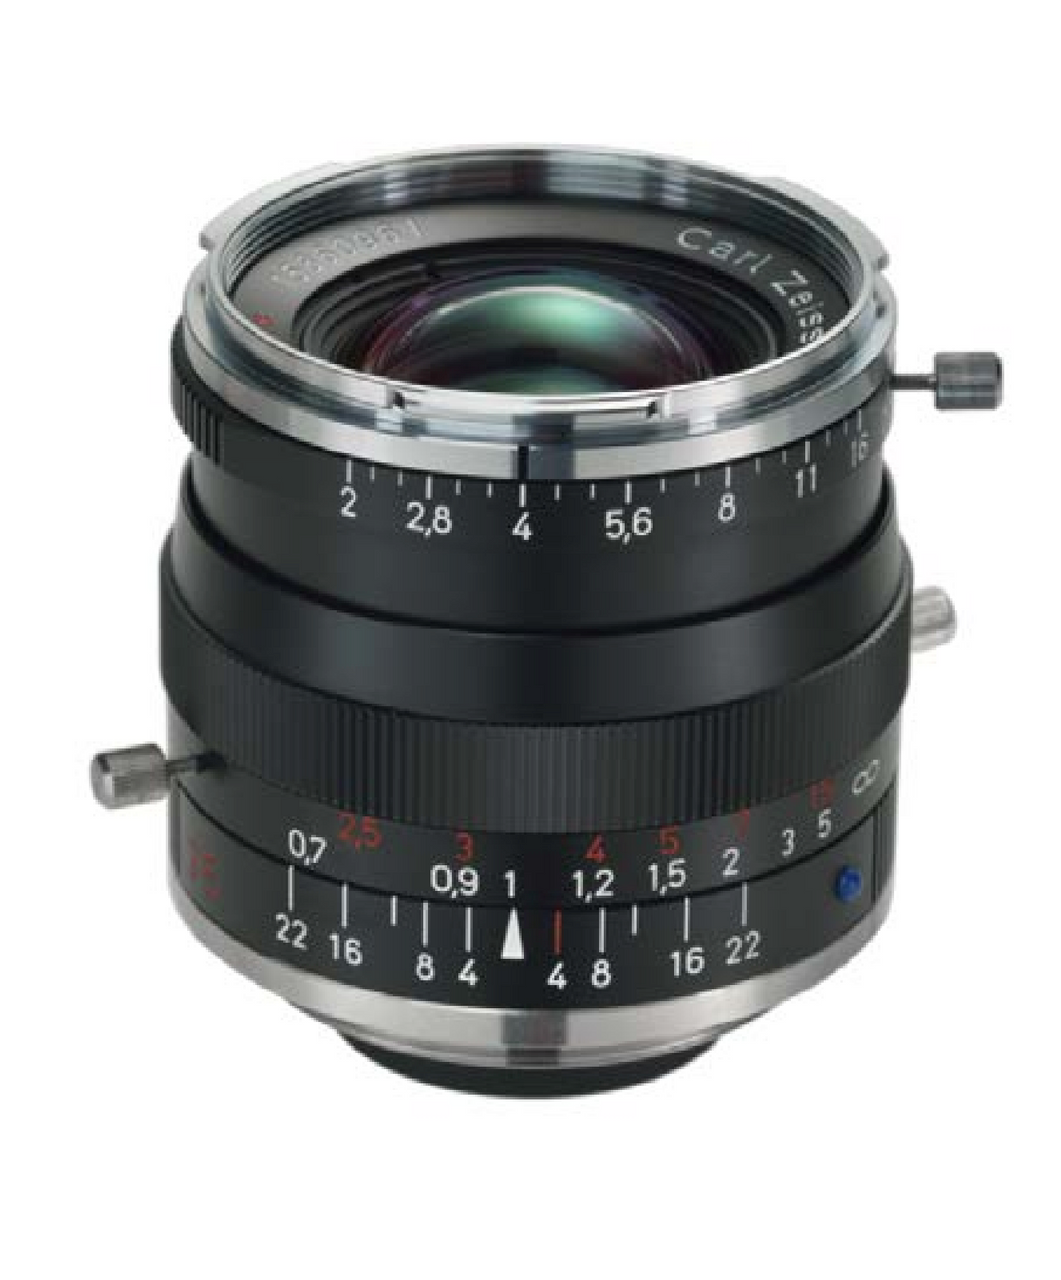 Zeiss Biogon T* 2/35 Z-M42-I 35mm F2.0 Manual Focus & Iris M42-I Mount  Lens, Compact & Light Weight, 43mm Image Circle, 25 Megapixel Rated